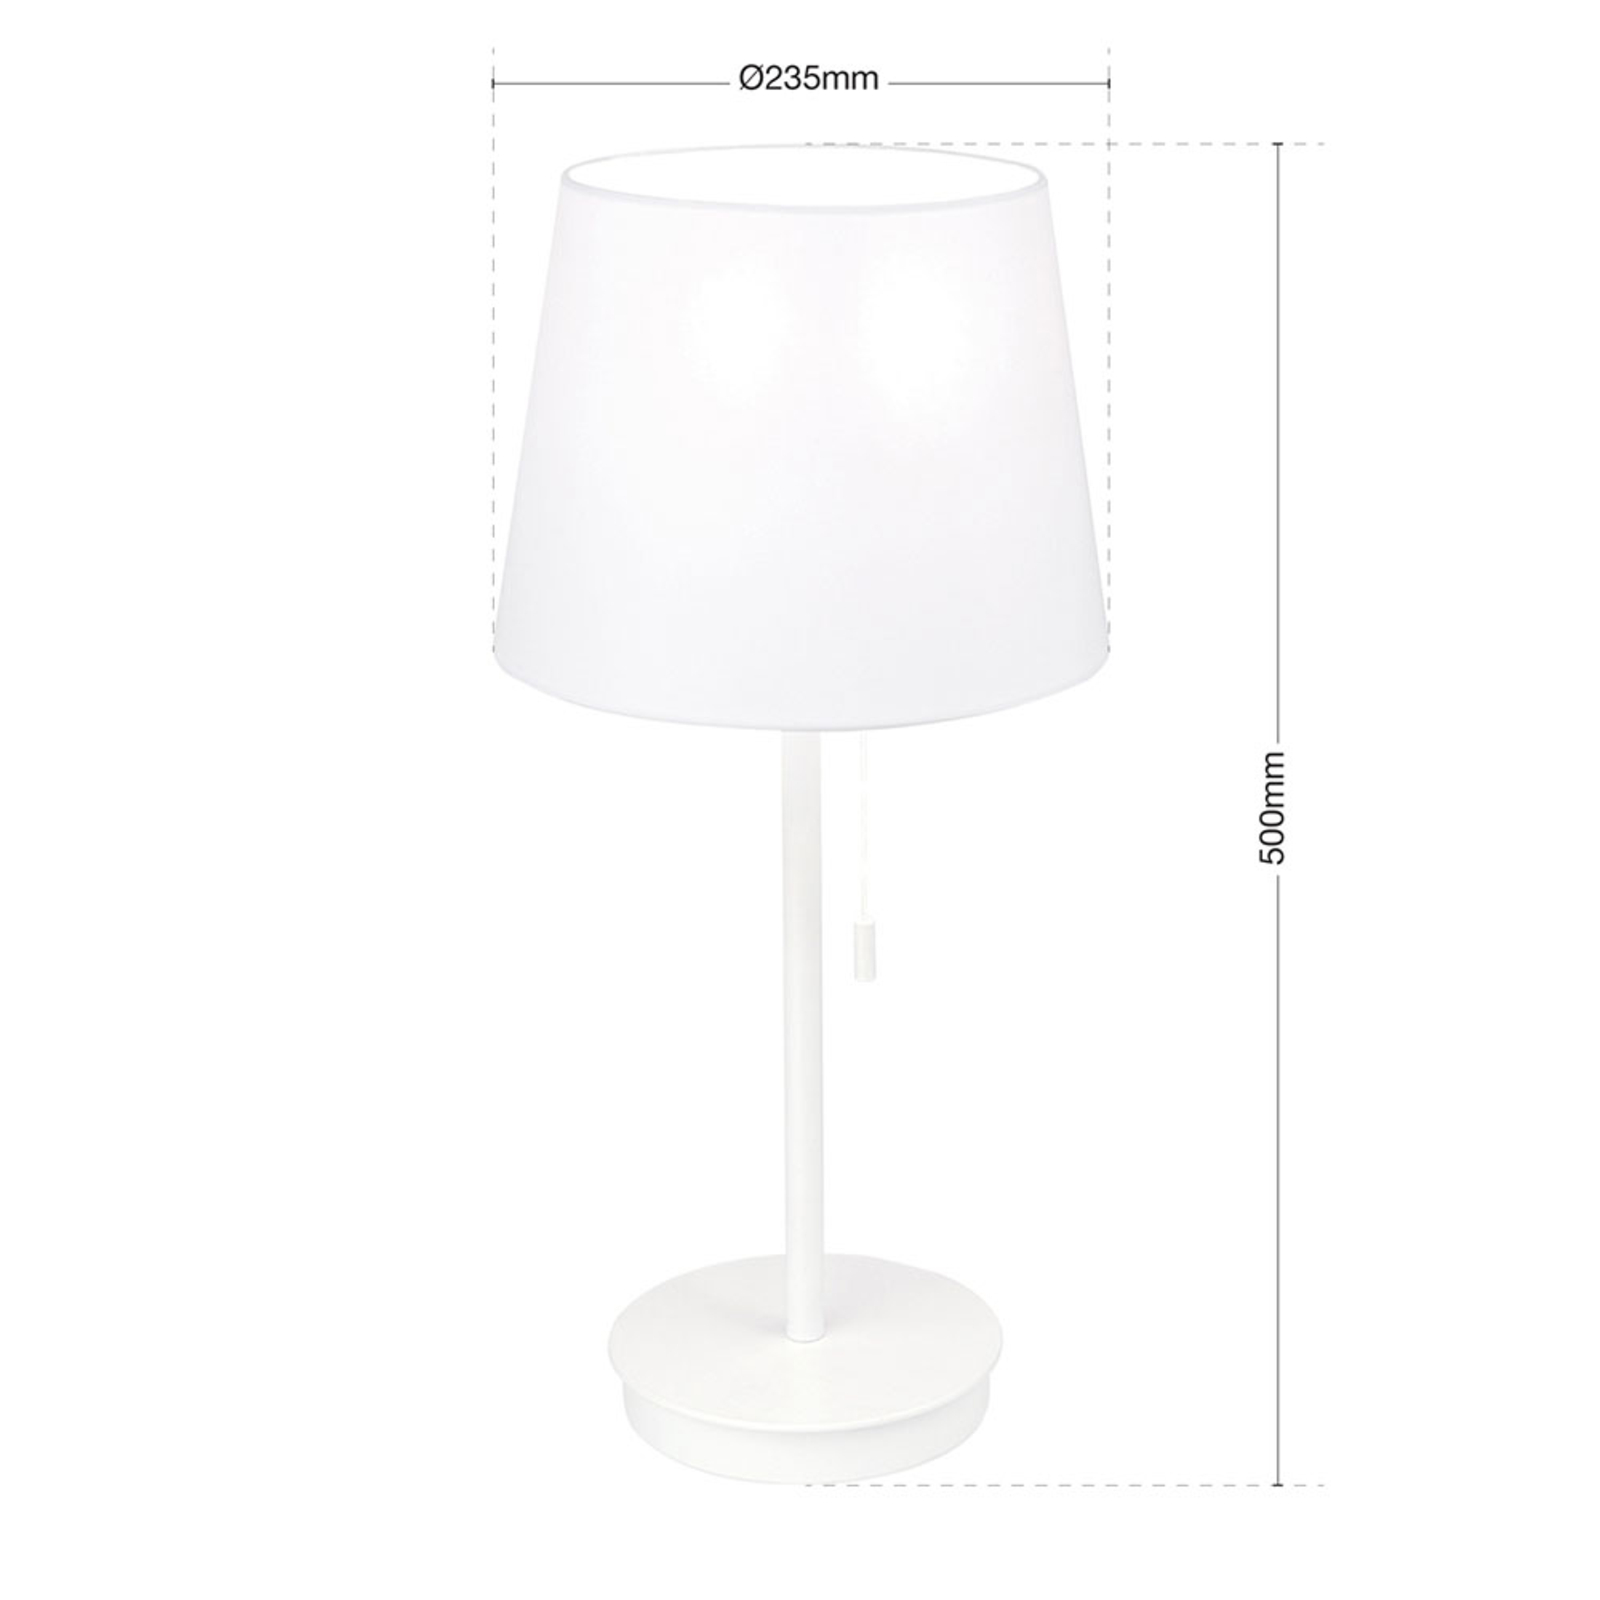 Ludwig table lamp with USB port white